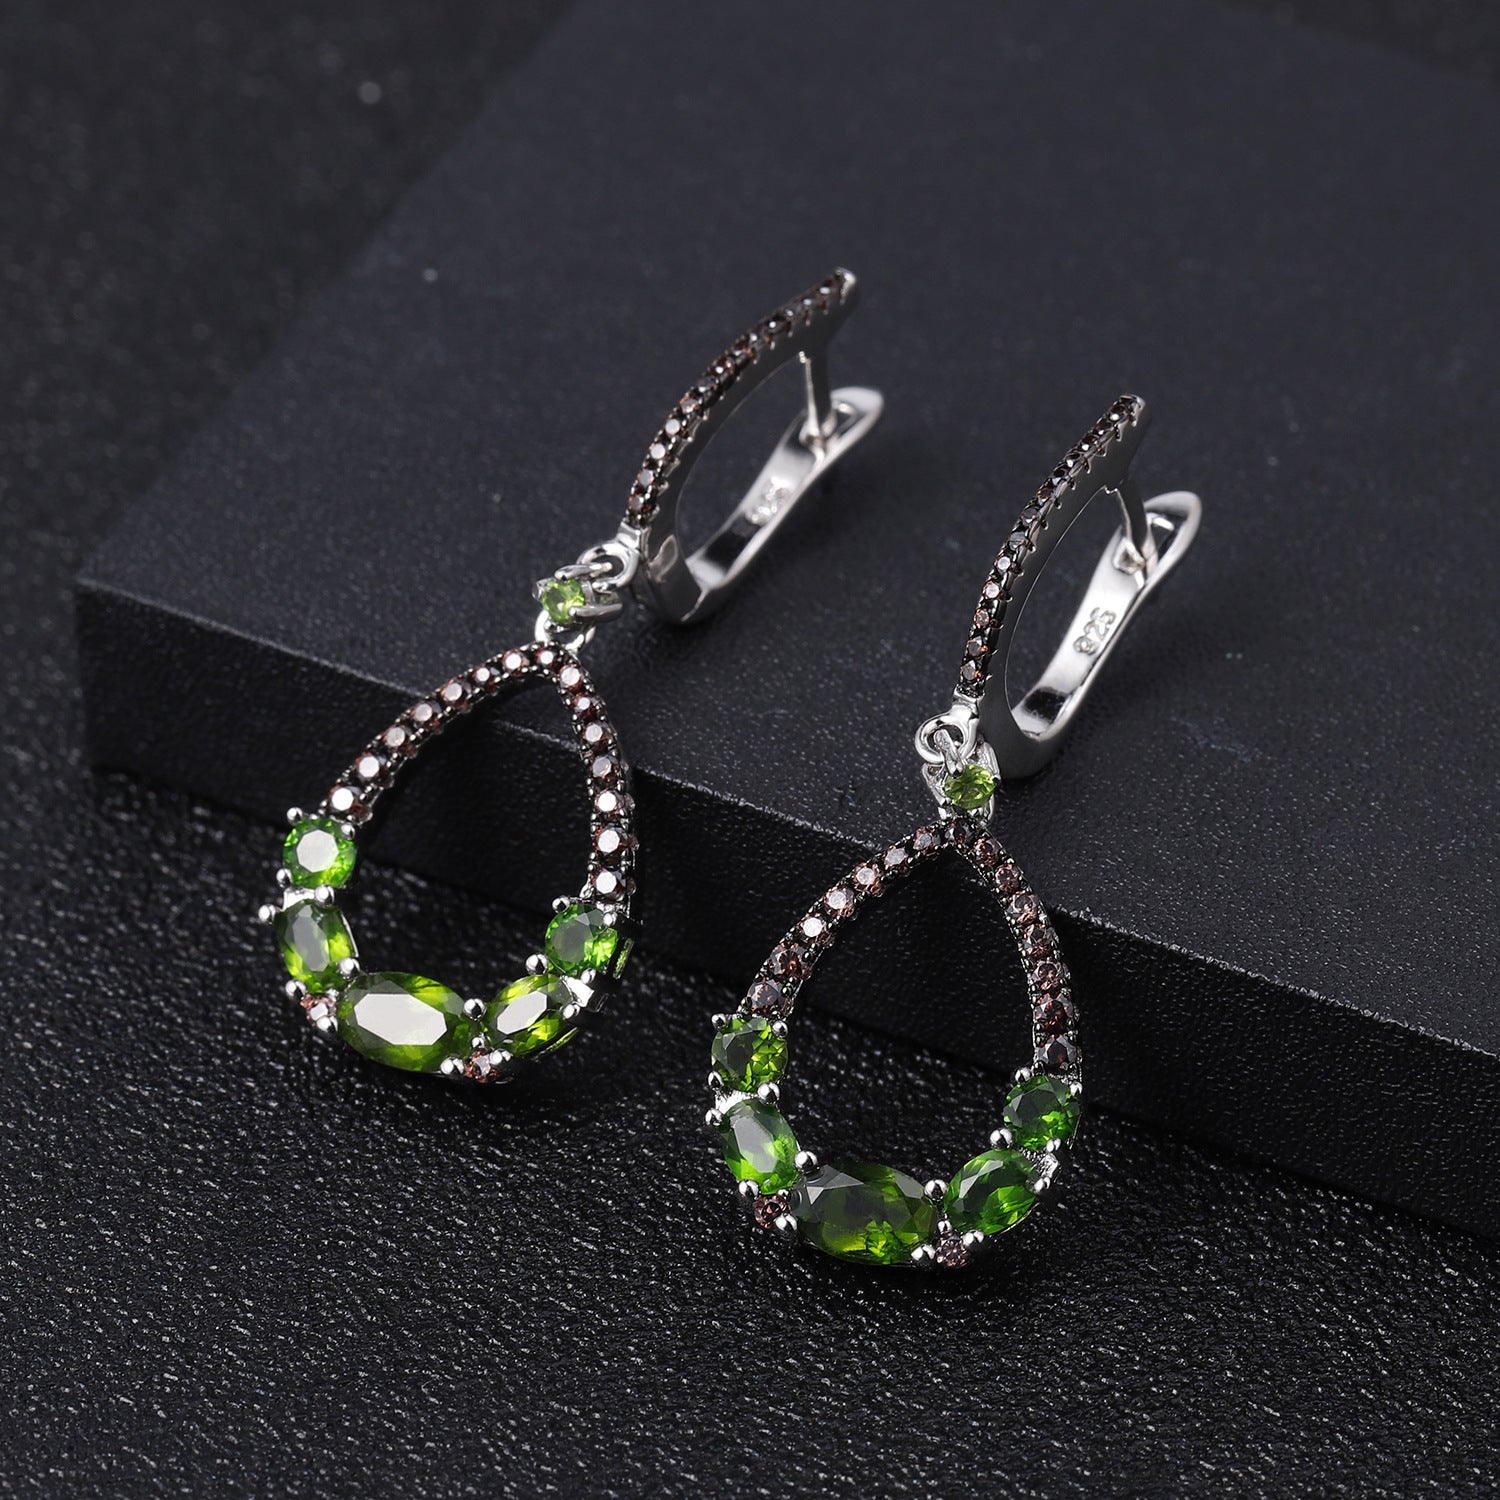 Natural Colourful Gemstones Silver Drop Earrings for Women